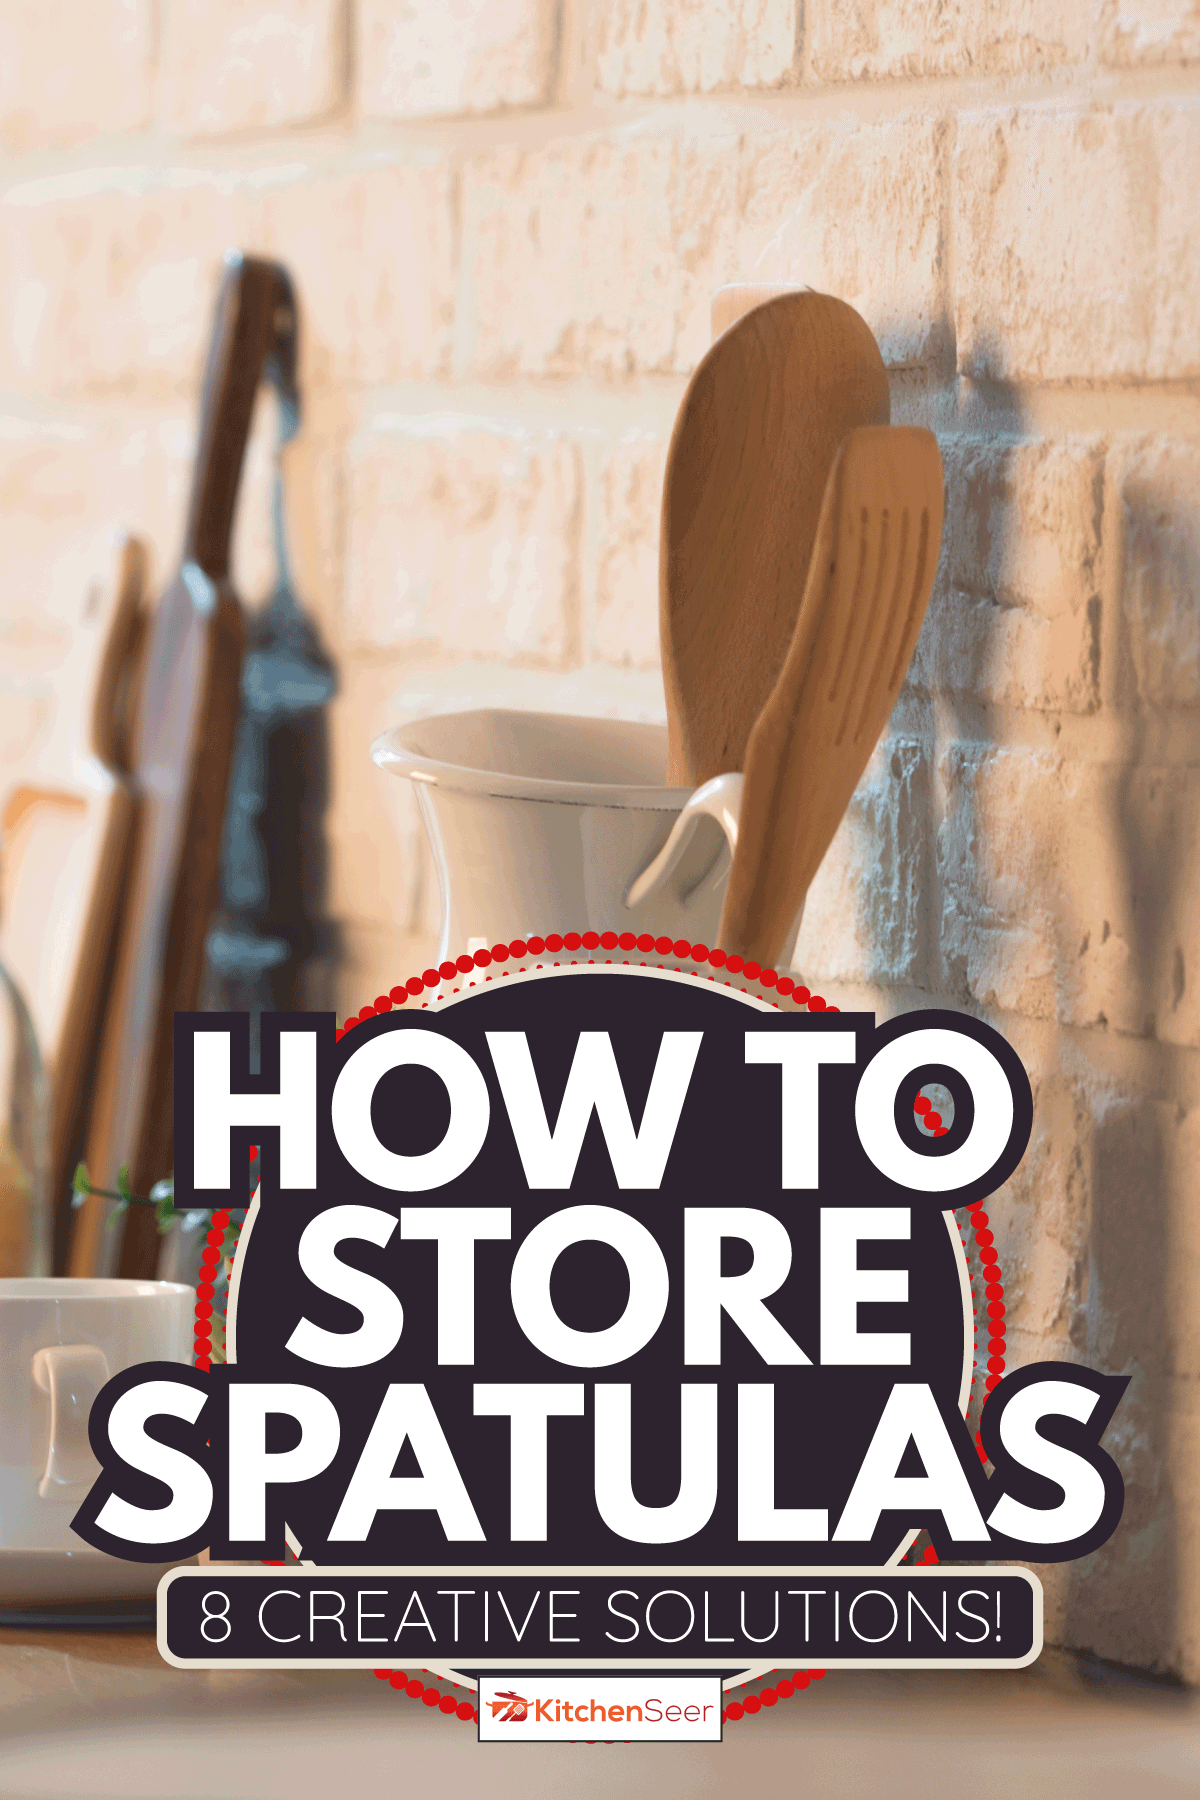 Kitchen utensils and dishware on wooden shelf. Kitchen interior. How To Store Spatulas - 8 Creative Solutions